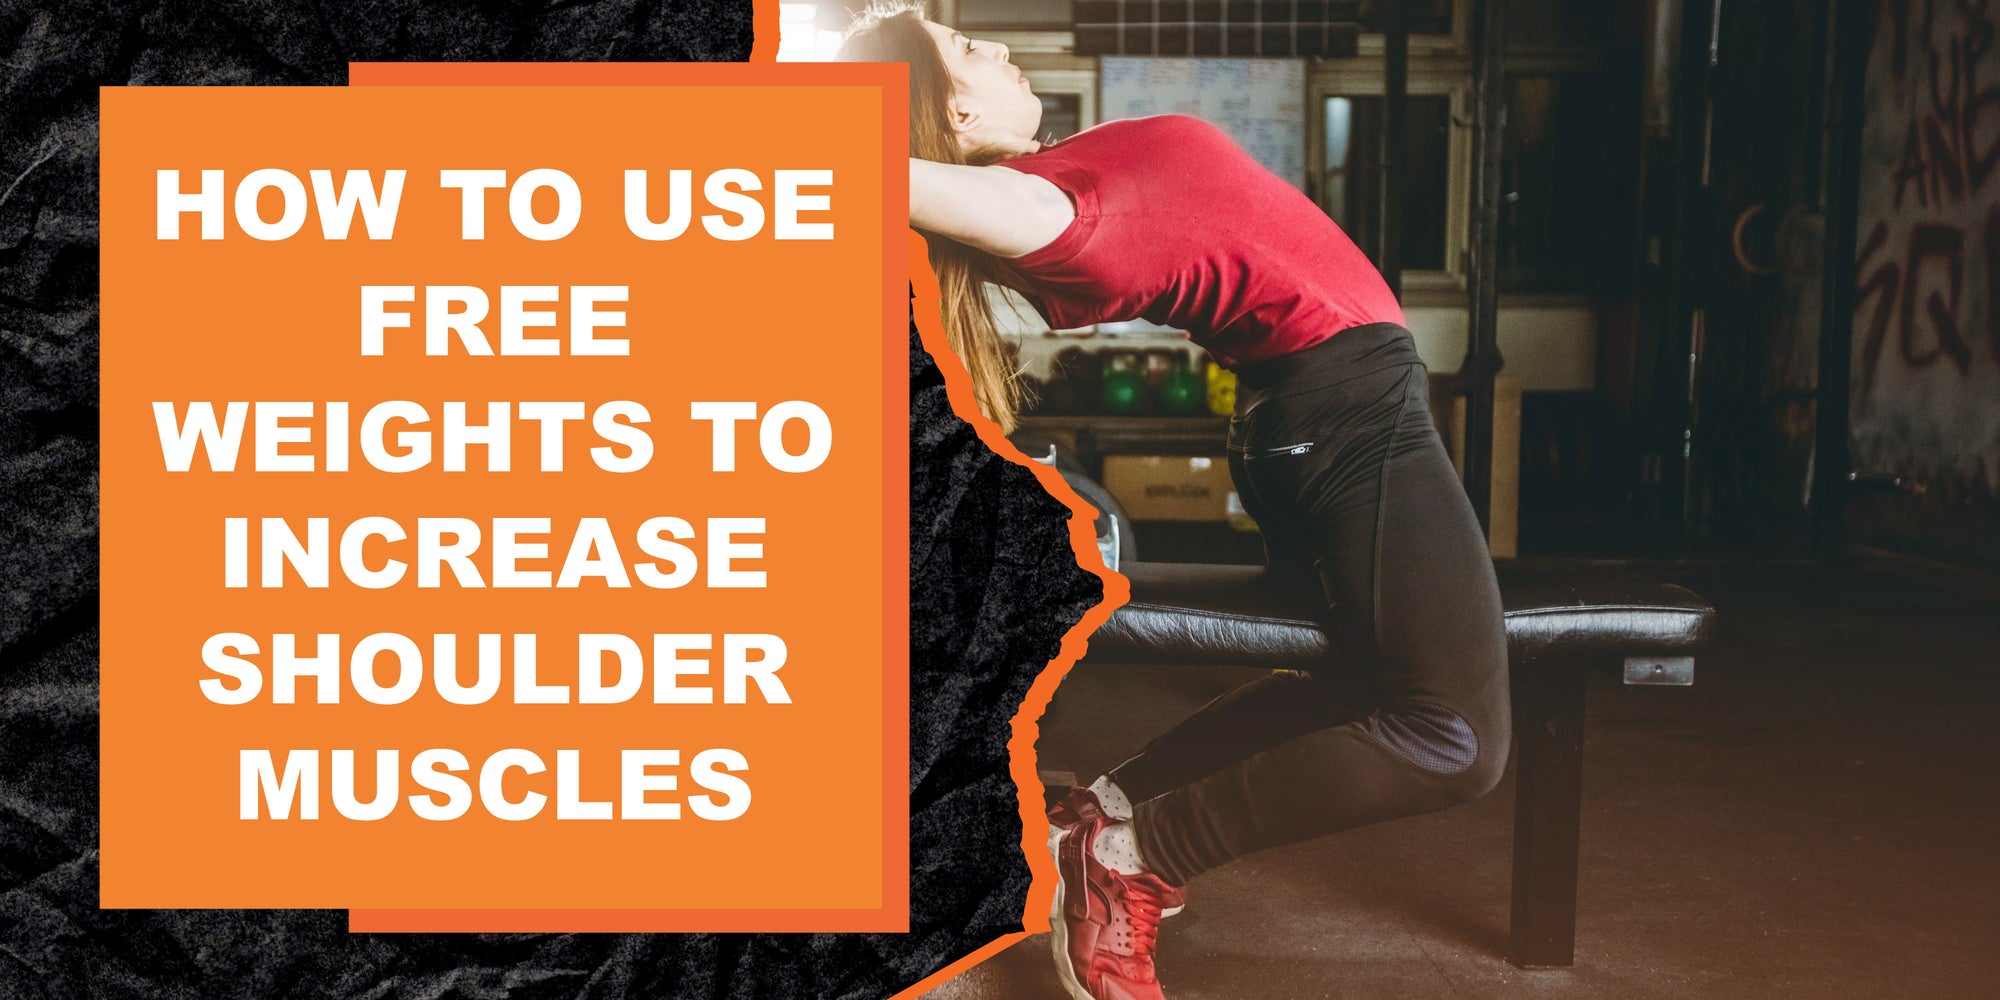 How to Use Free Weights to Increase Shoulder Muscles